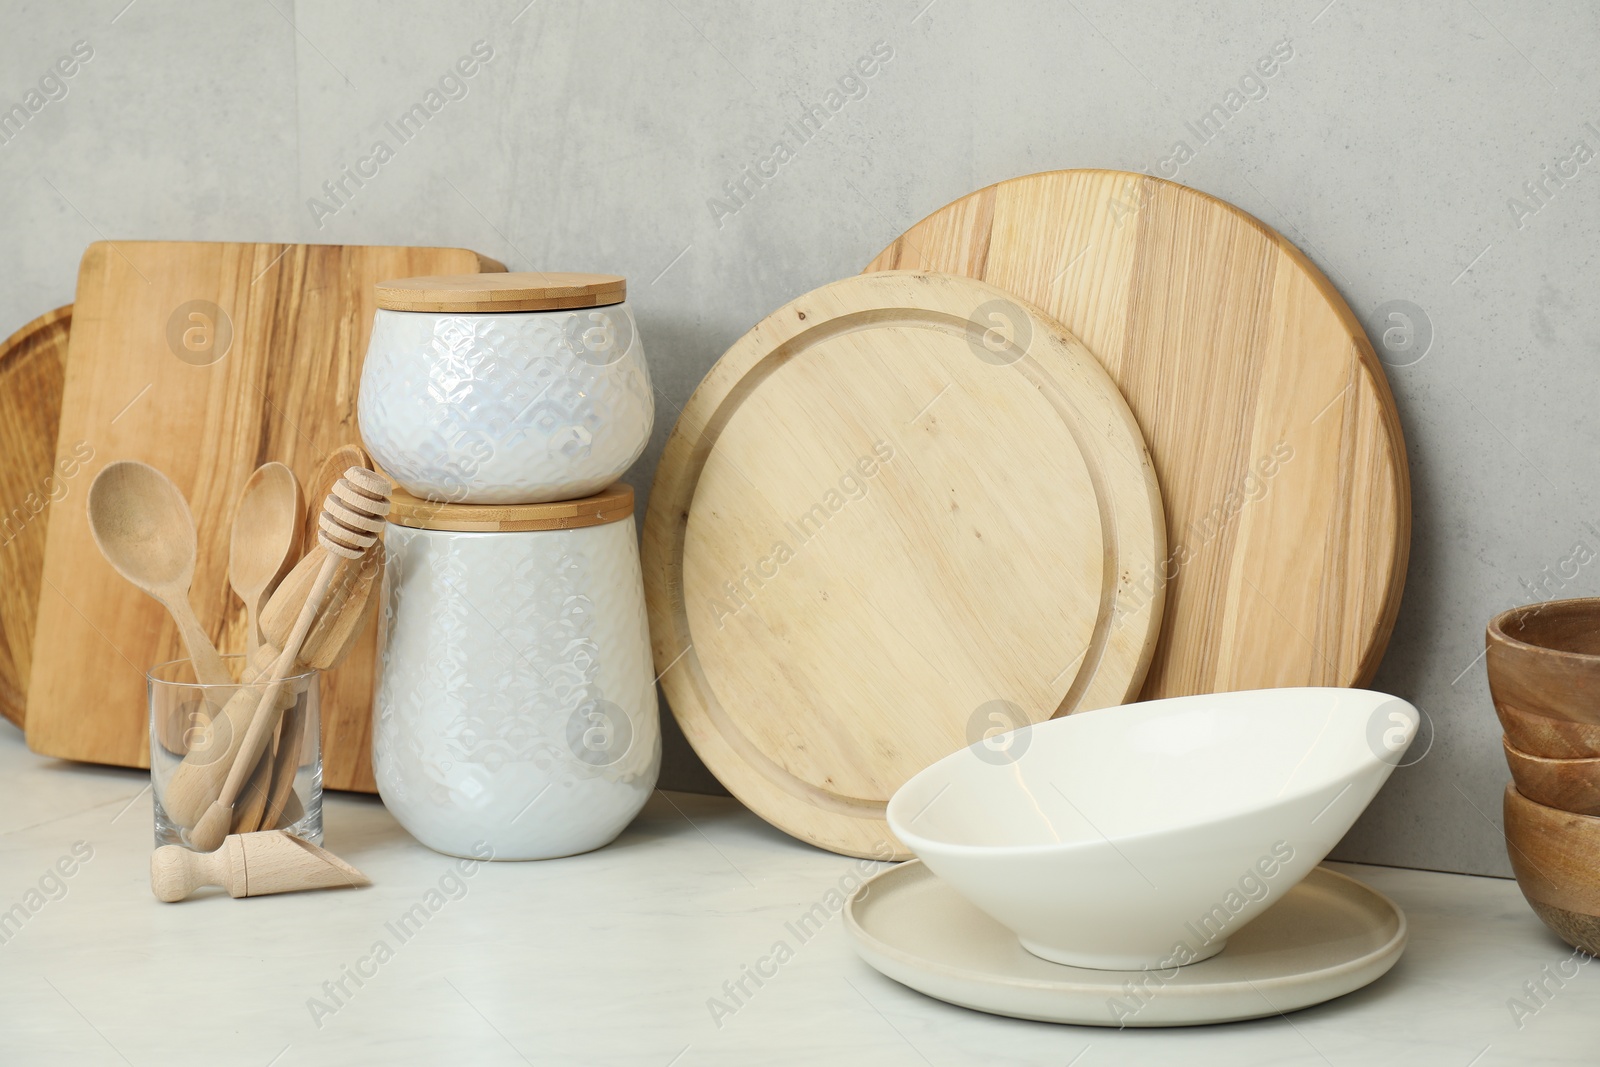 Photo of DIfferent wooden cutting boards and other cooking utensils on white countertop in kitchen